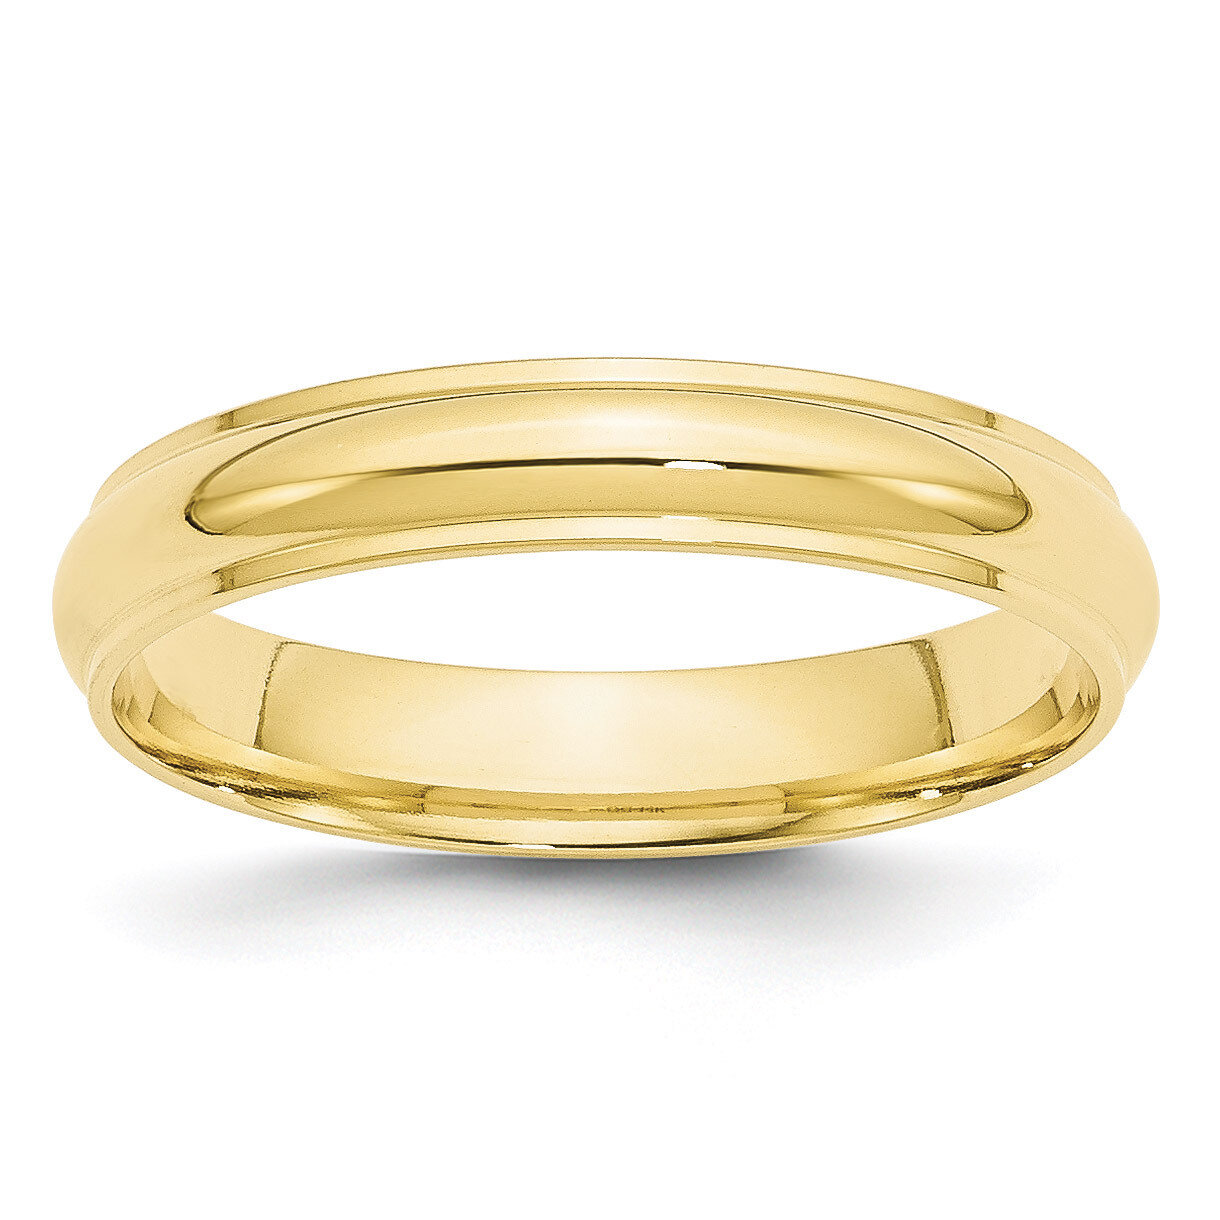 4mm Half Round with Edge Band 10k Yellow Gold Engravable 1HRE040-10